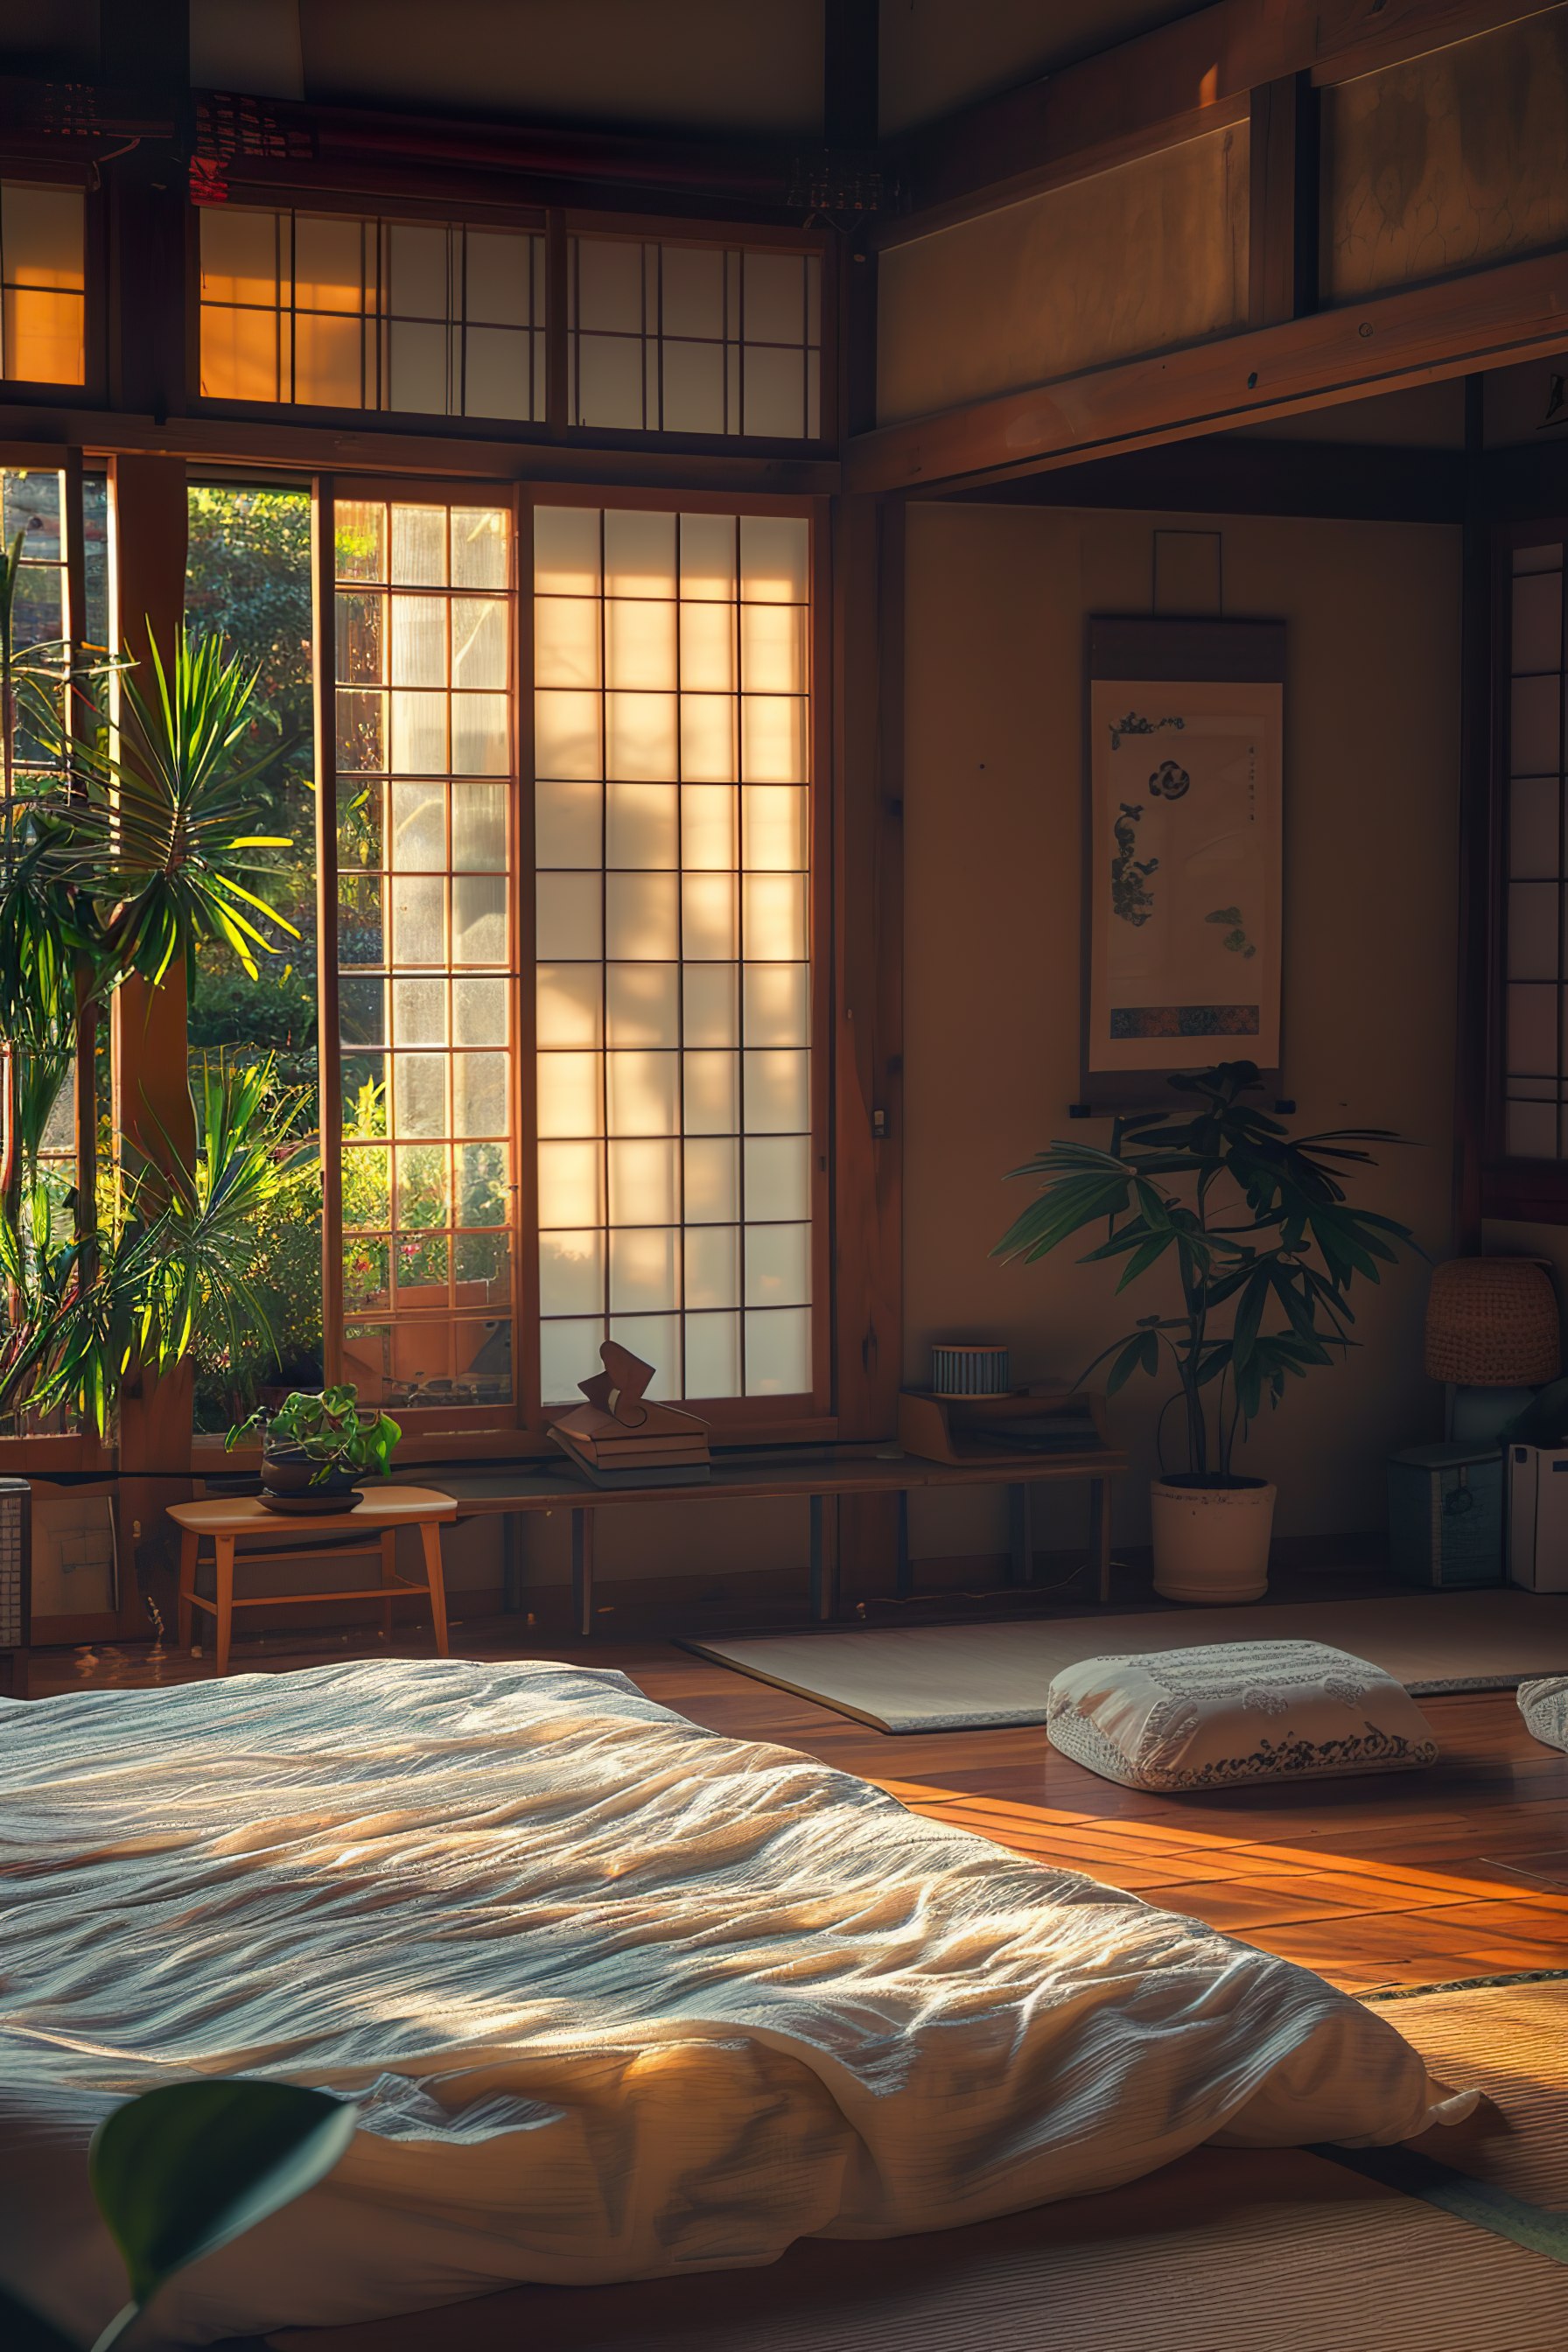 Traditional Japanese room with tatami floor, futon bed, and shoji doors, bathed in warm sunlight.